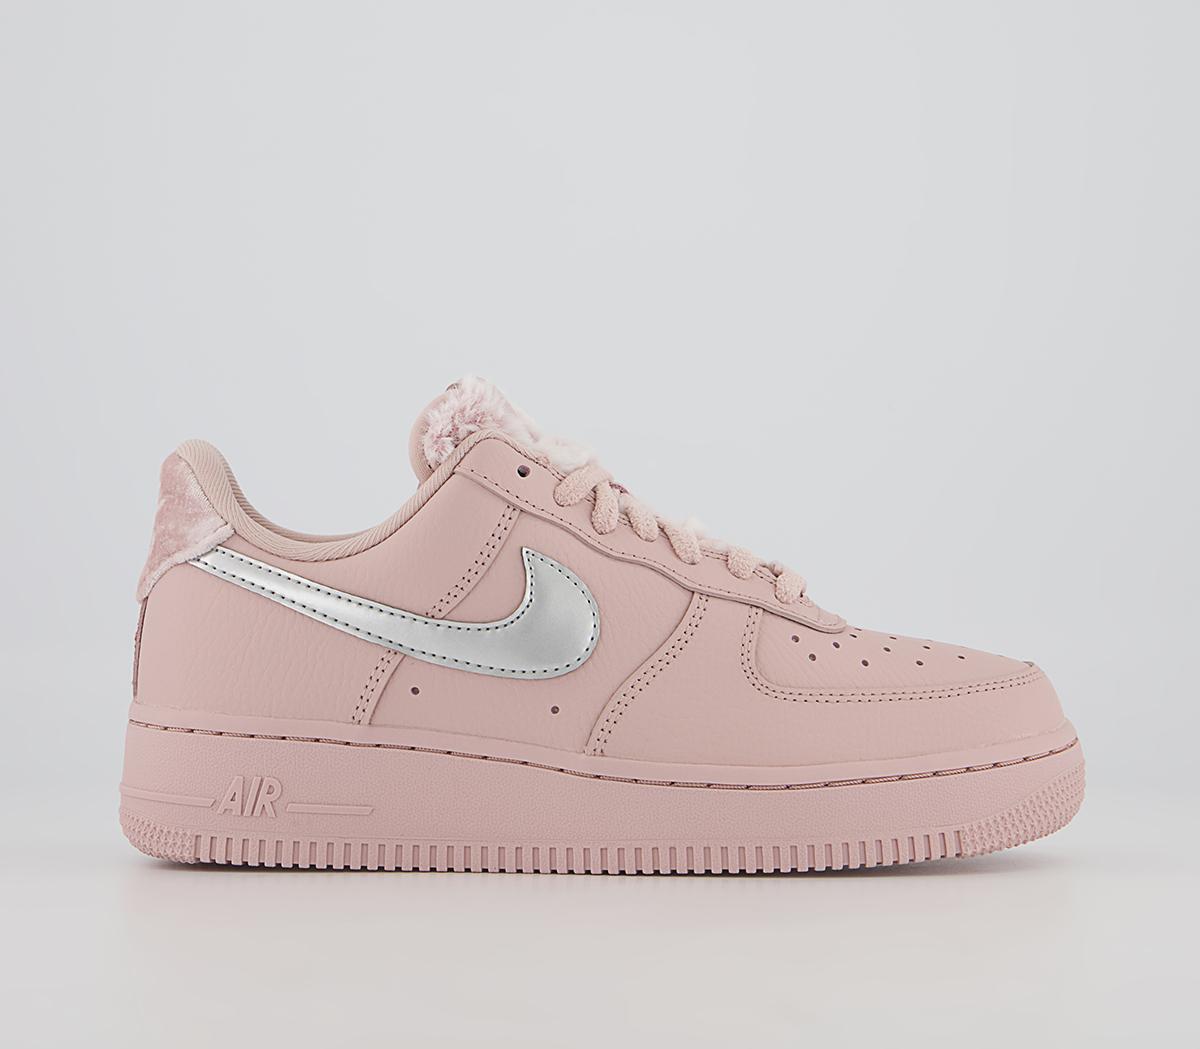 Nike Air Force 1 07 Trainers Pink Oxford - Excluded From Site